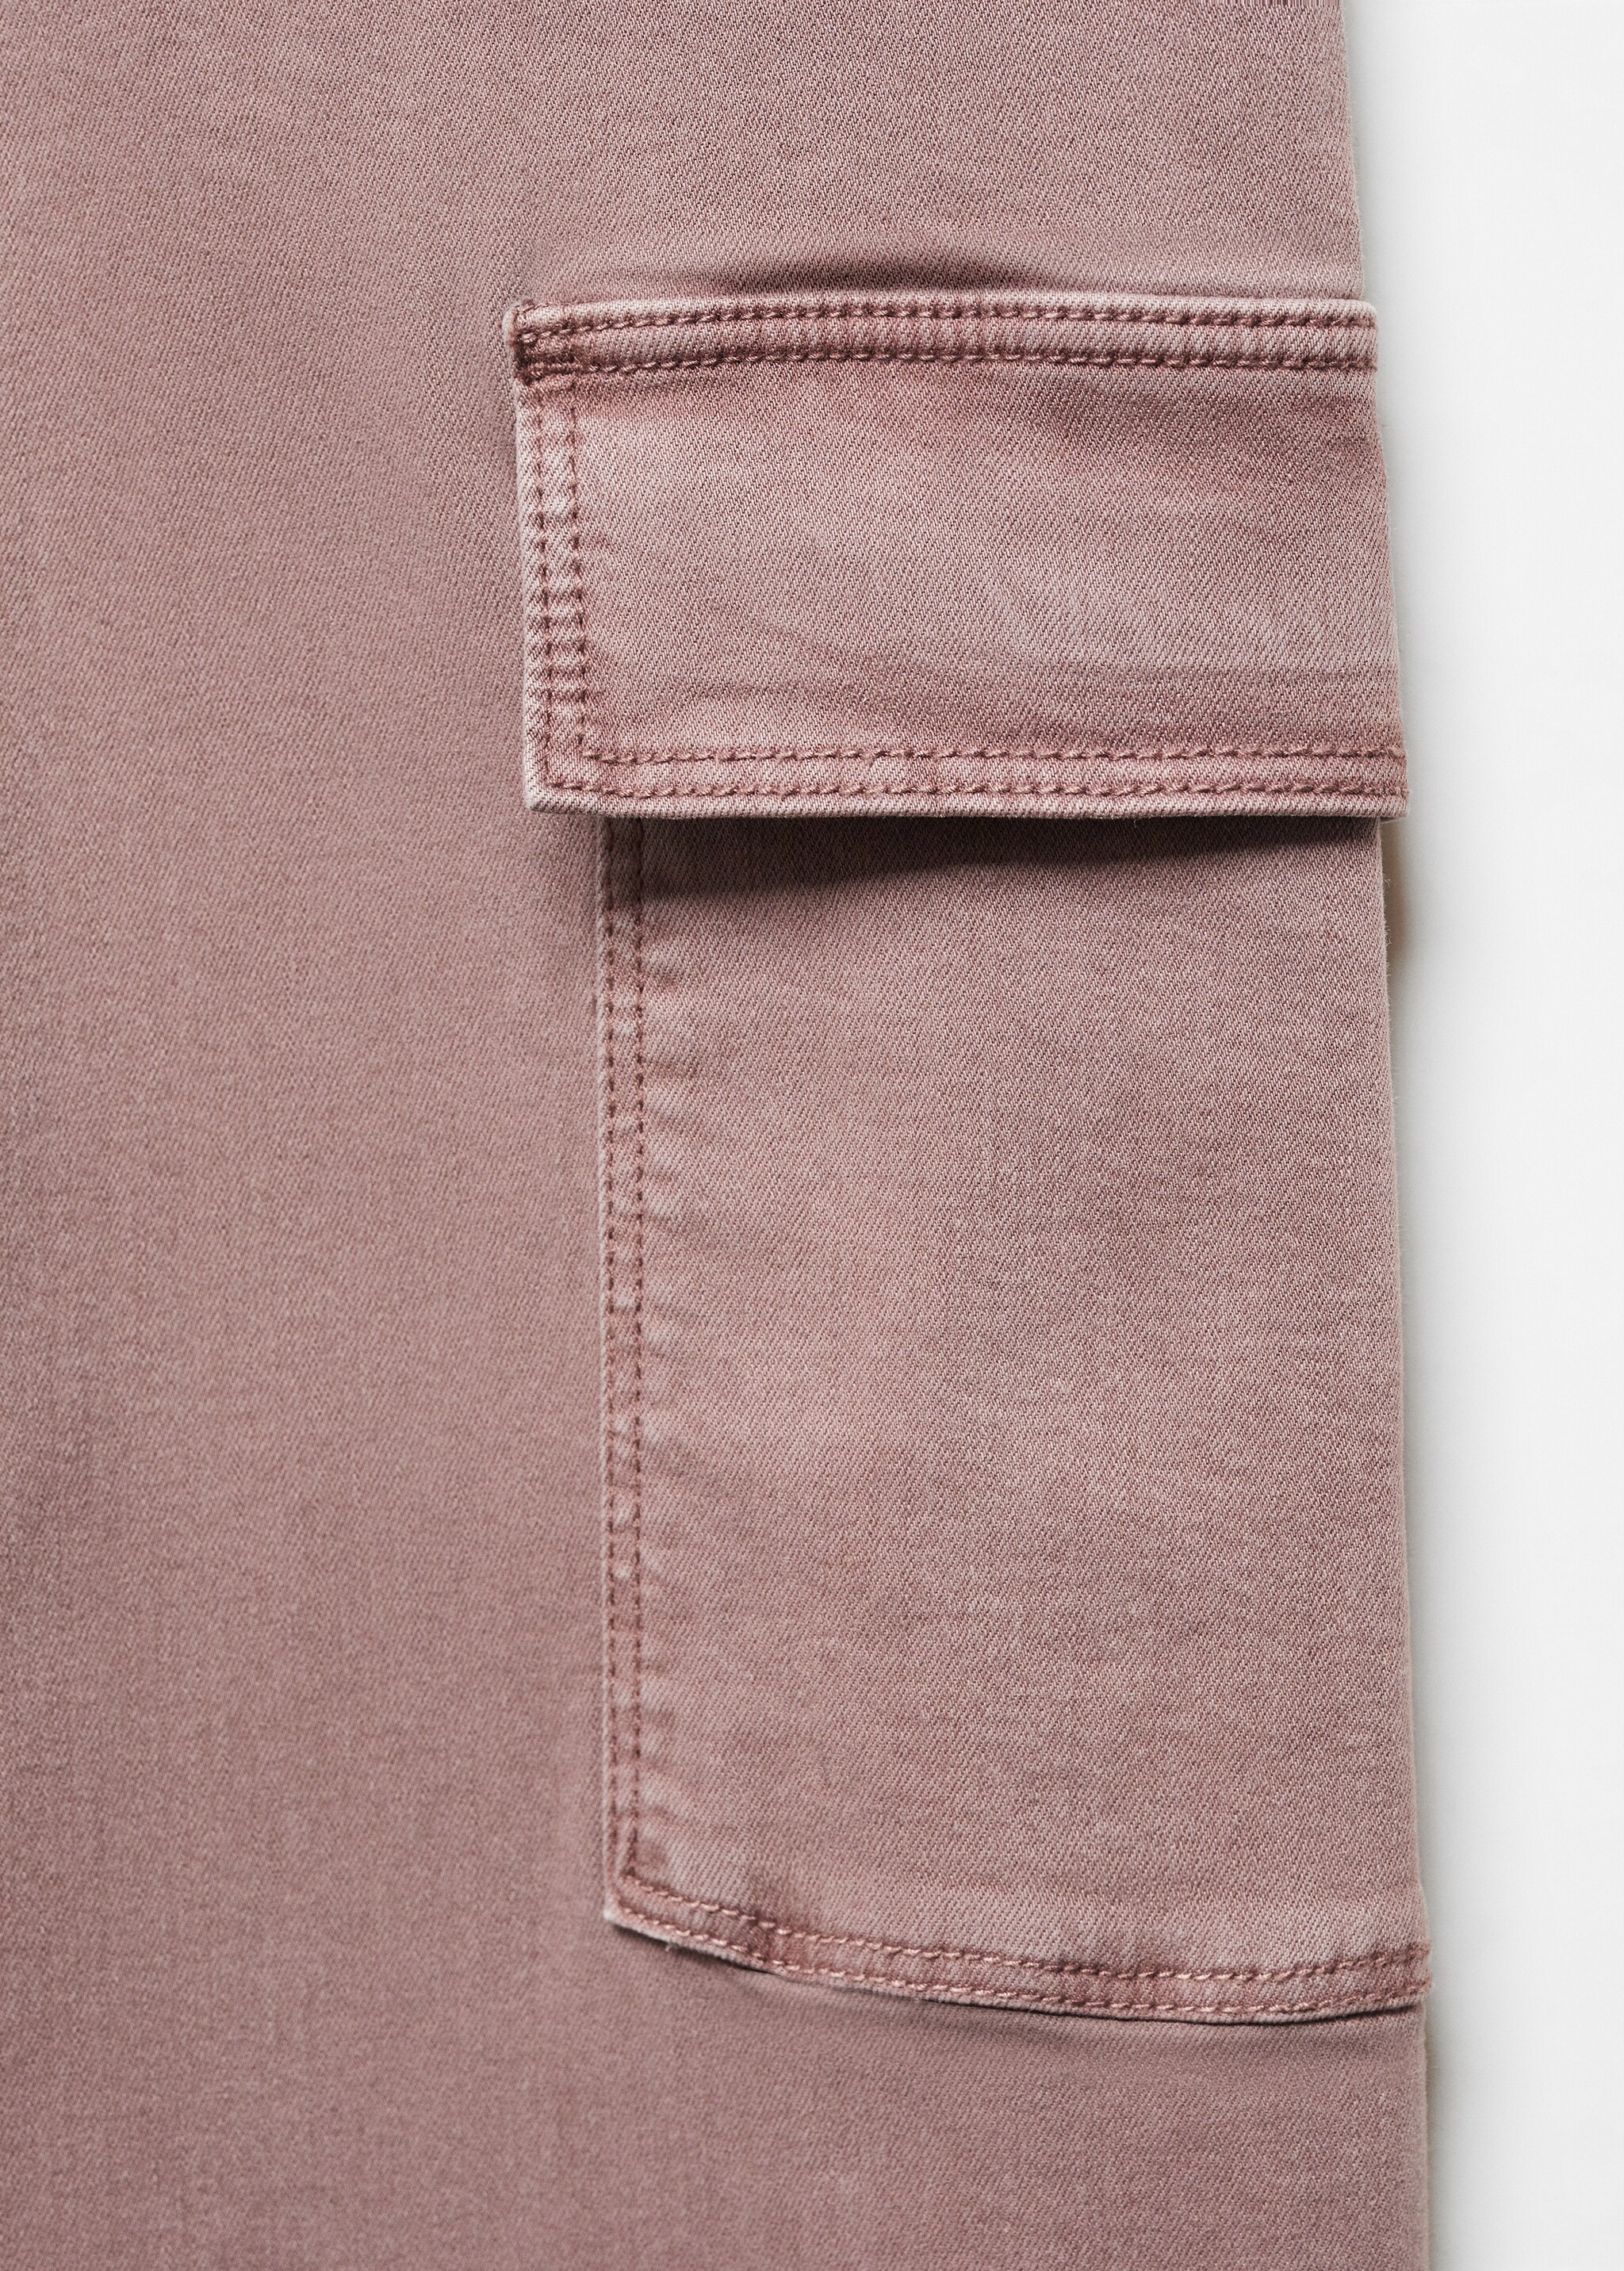 Cargo culotte pants - Details of the article 8